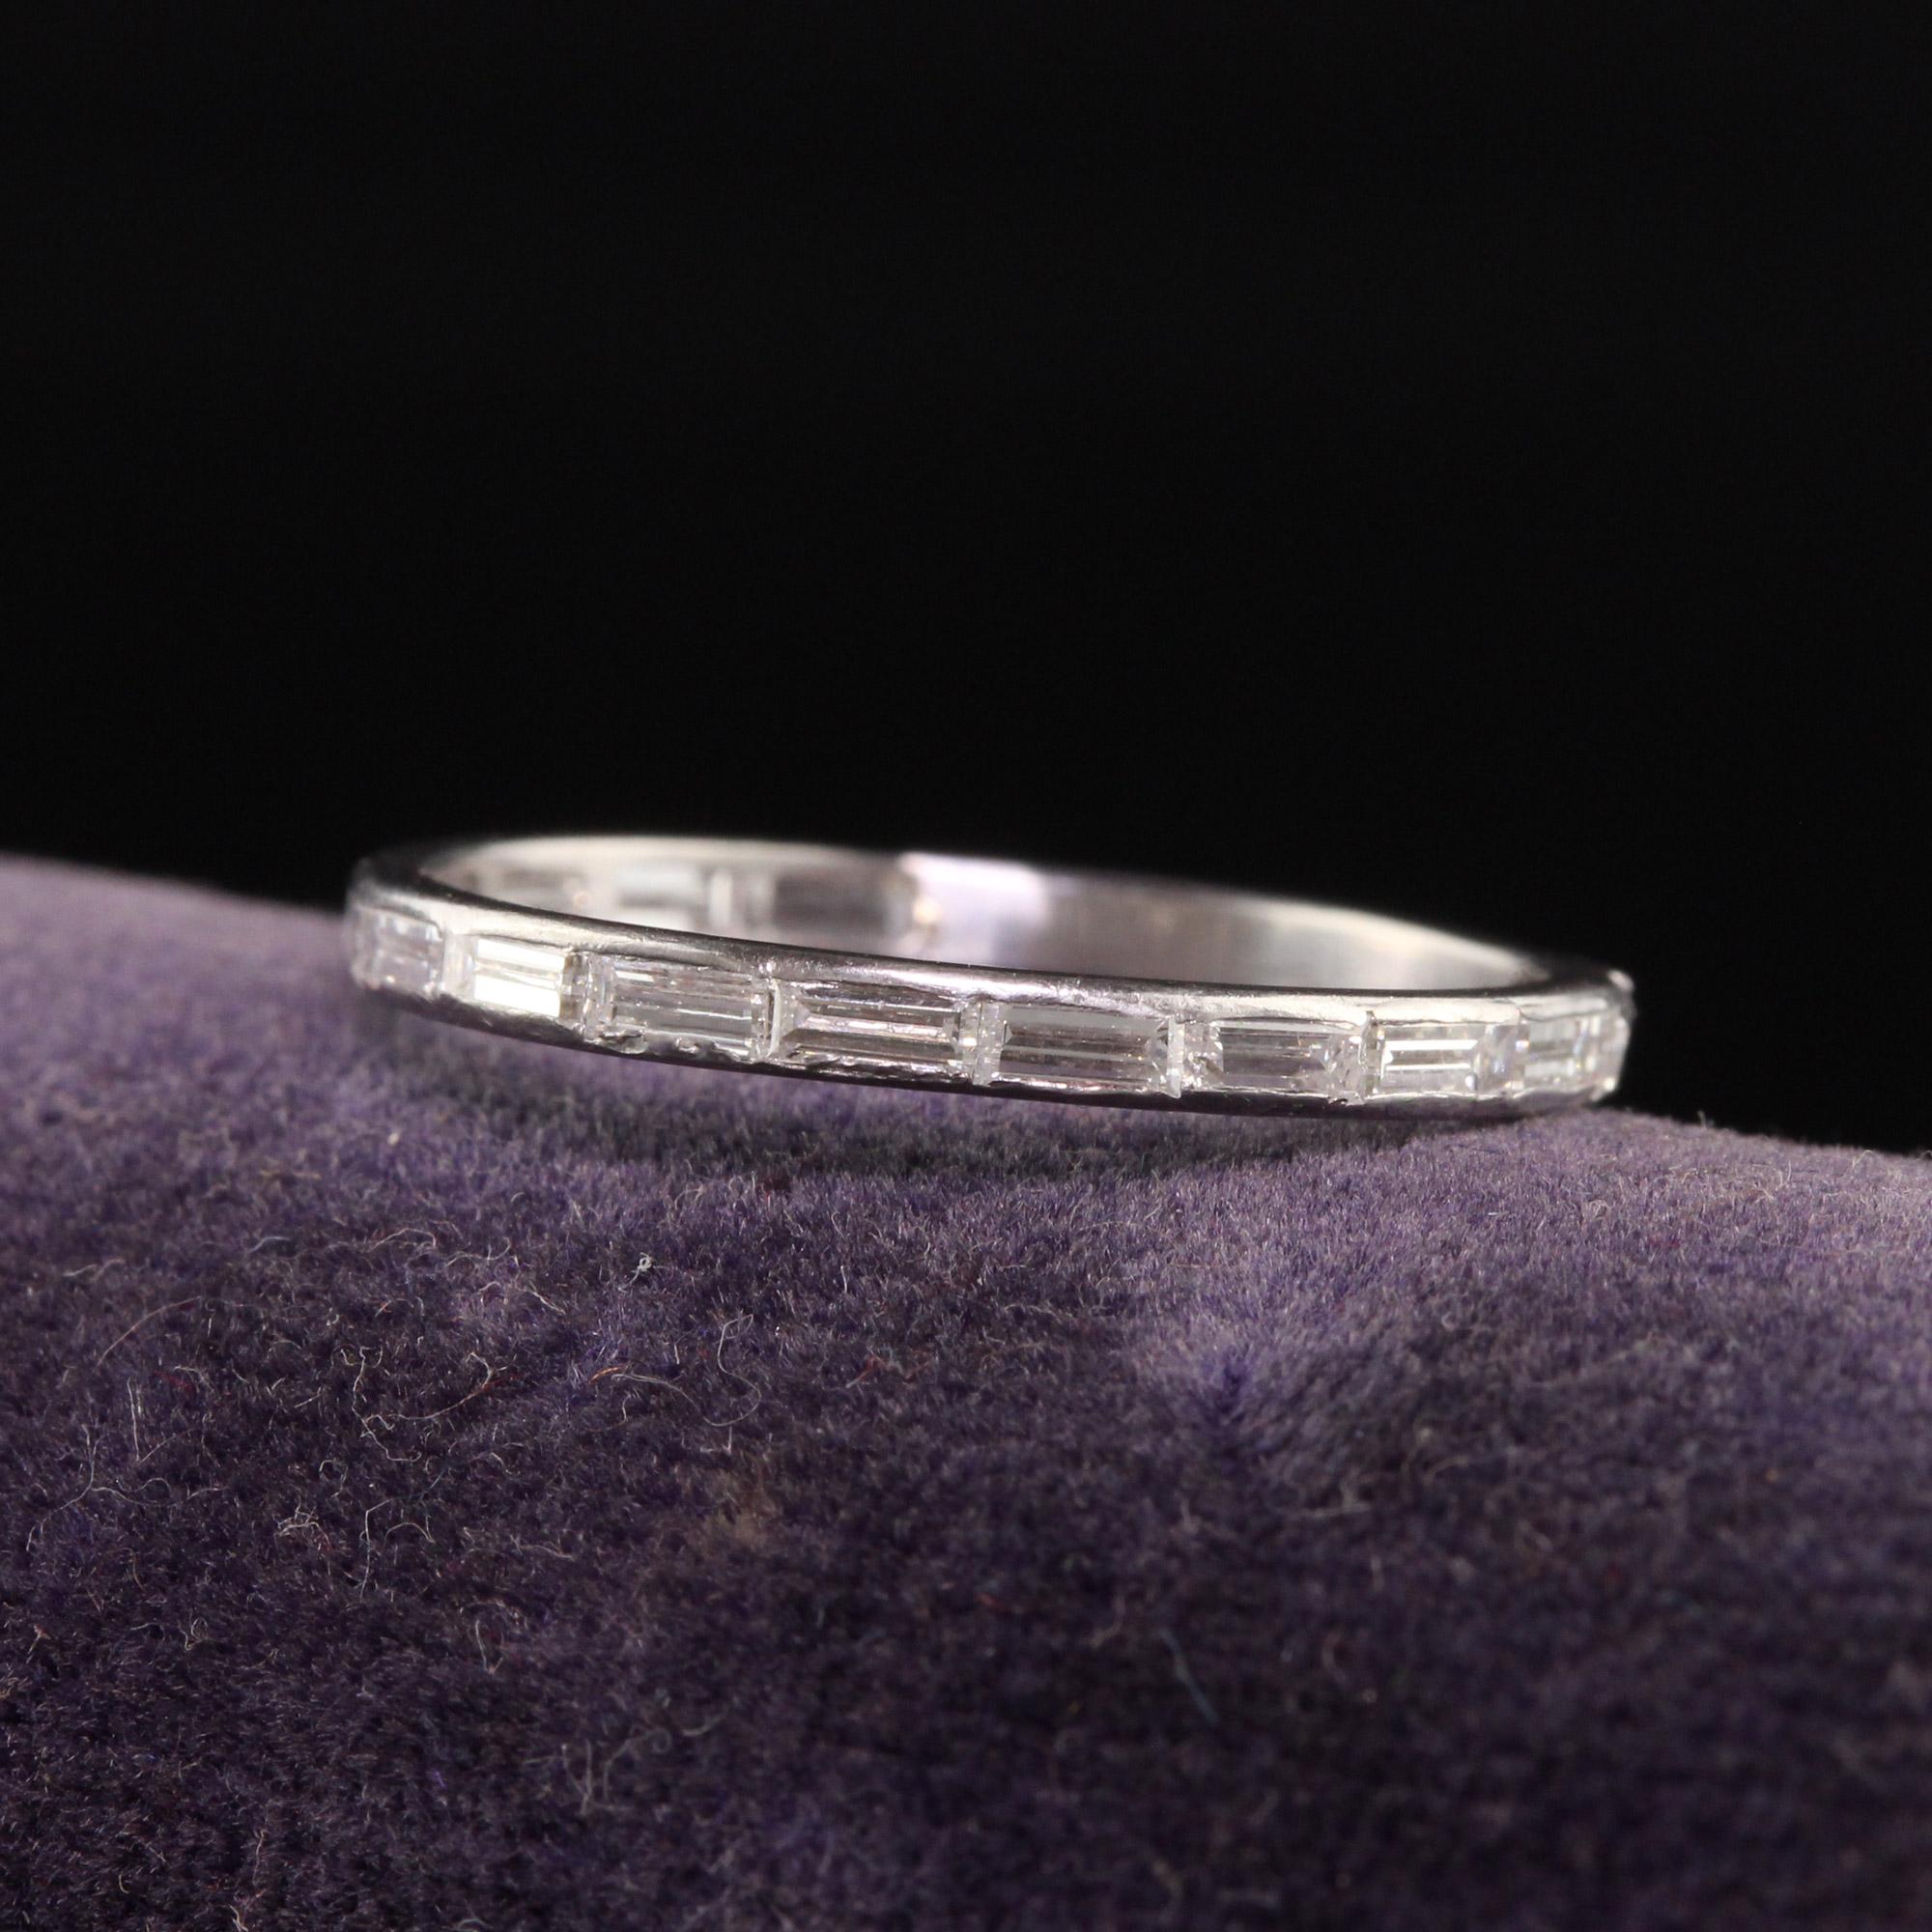 Beautiful Antique Art Deco Platinum Baguette Diamond Wedding Band. This beautiful band is crafted in platinum. This band was previously sized and had a portion of the band replaced with plain platinum. It is a gorgeous band with beautifully white